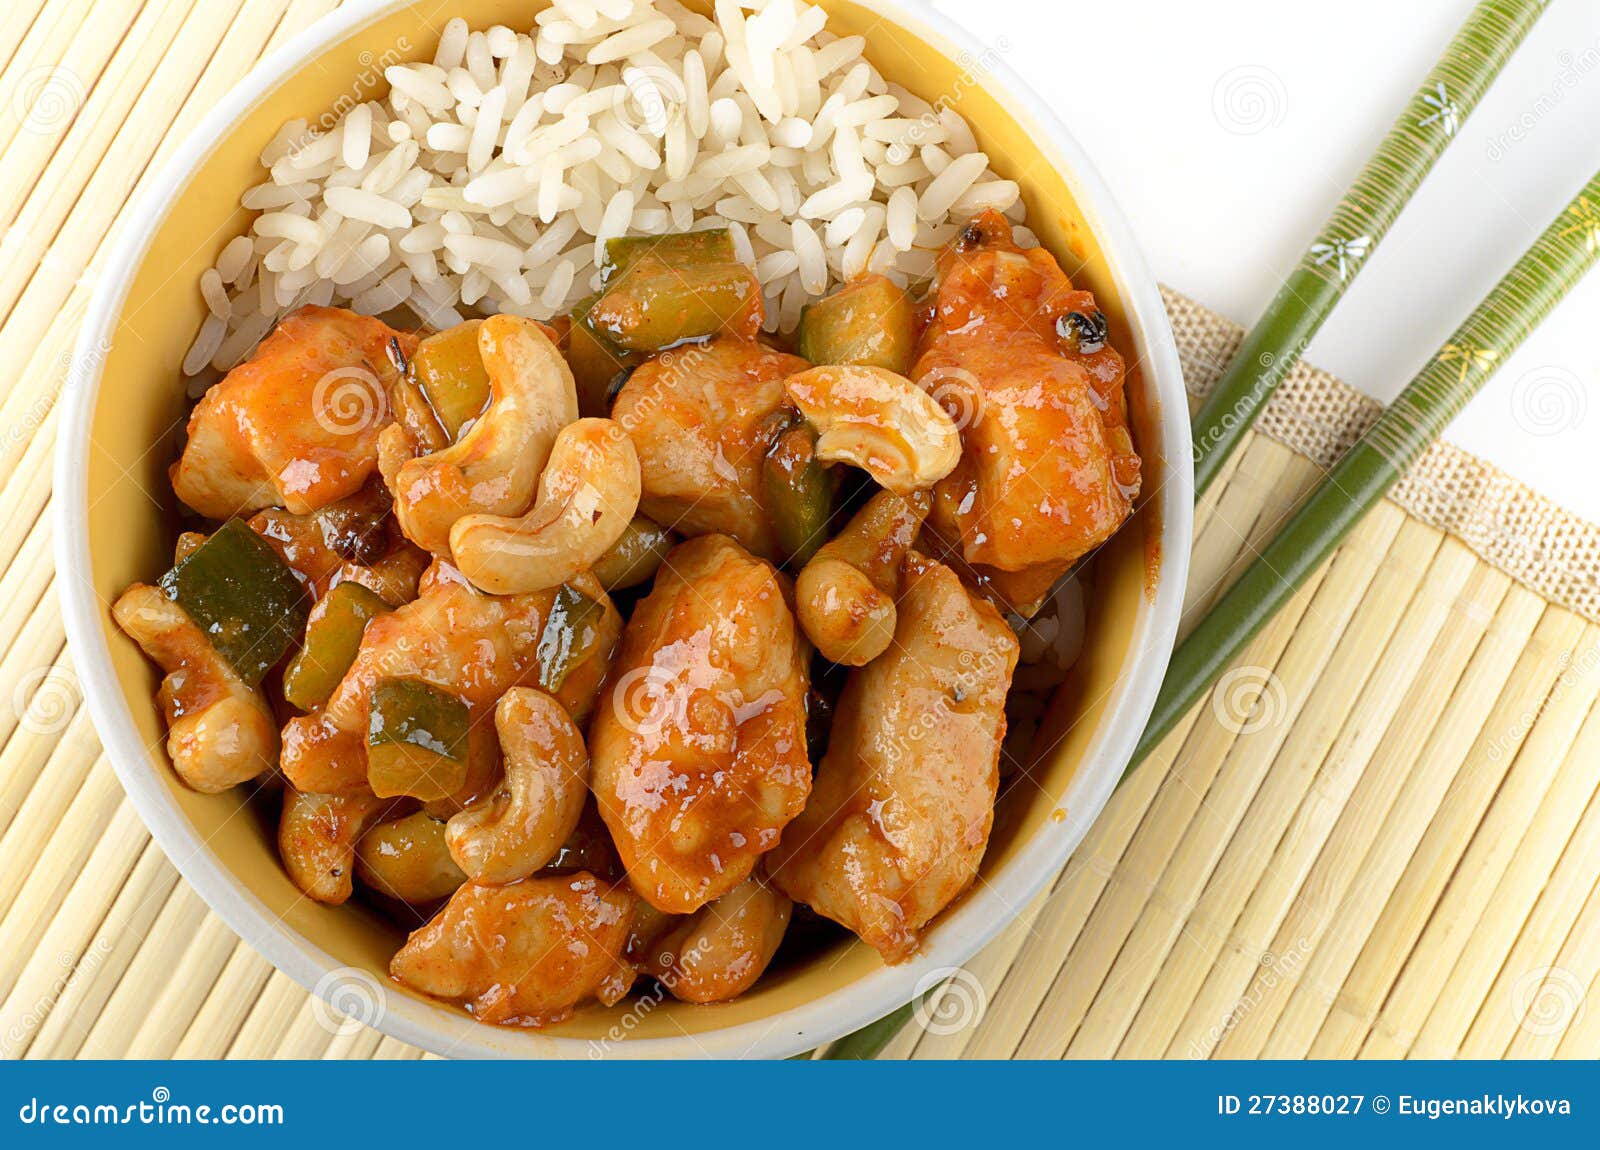 kung pao chicken with rice and chopsticks